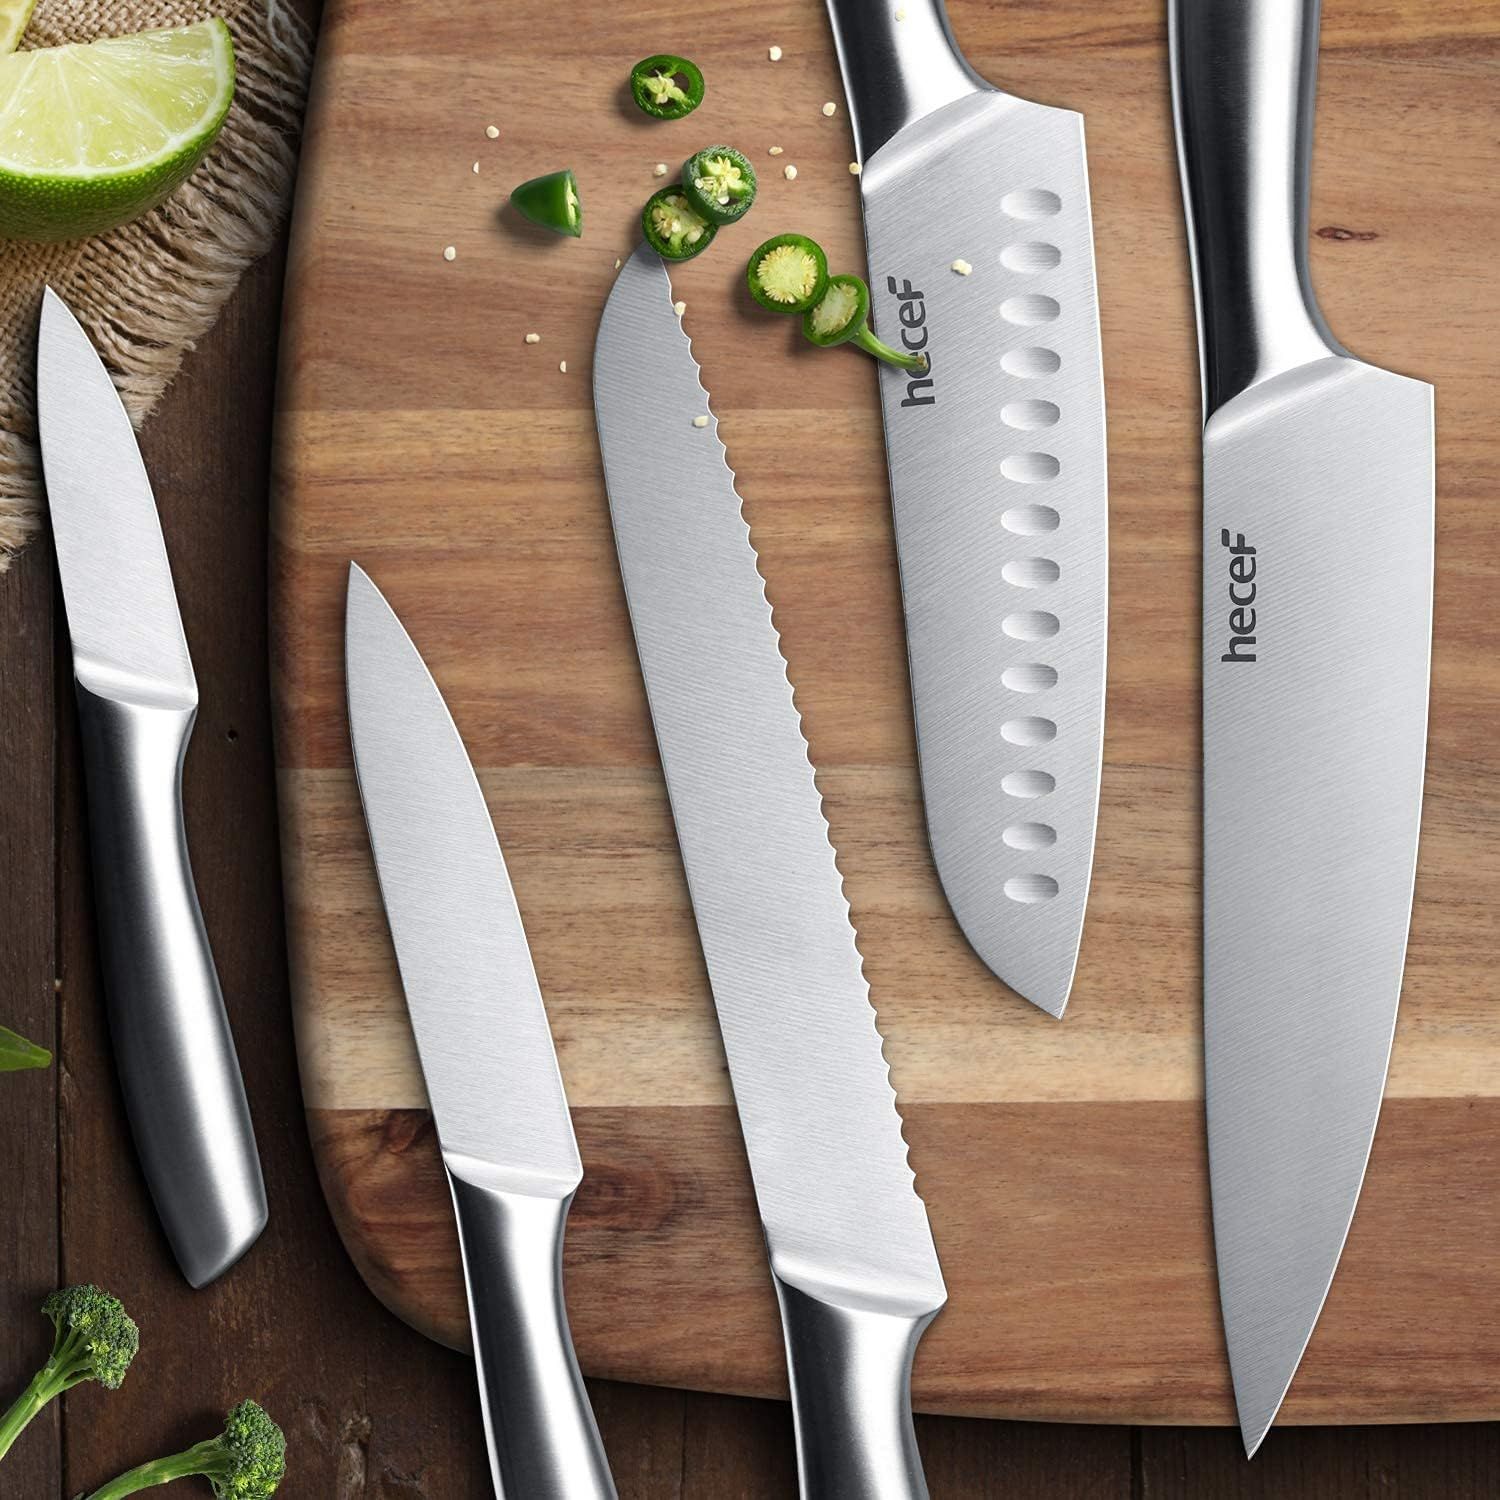 Hecef Silver Kitchen knife set of 5, Satin Finish Blade with Hollow Ha – Hecef  Kitchen